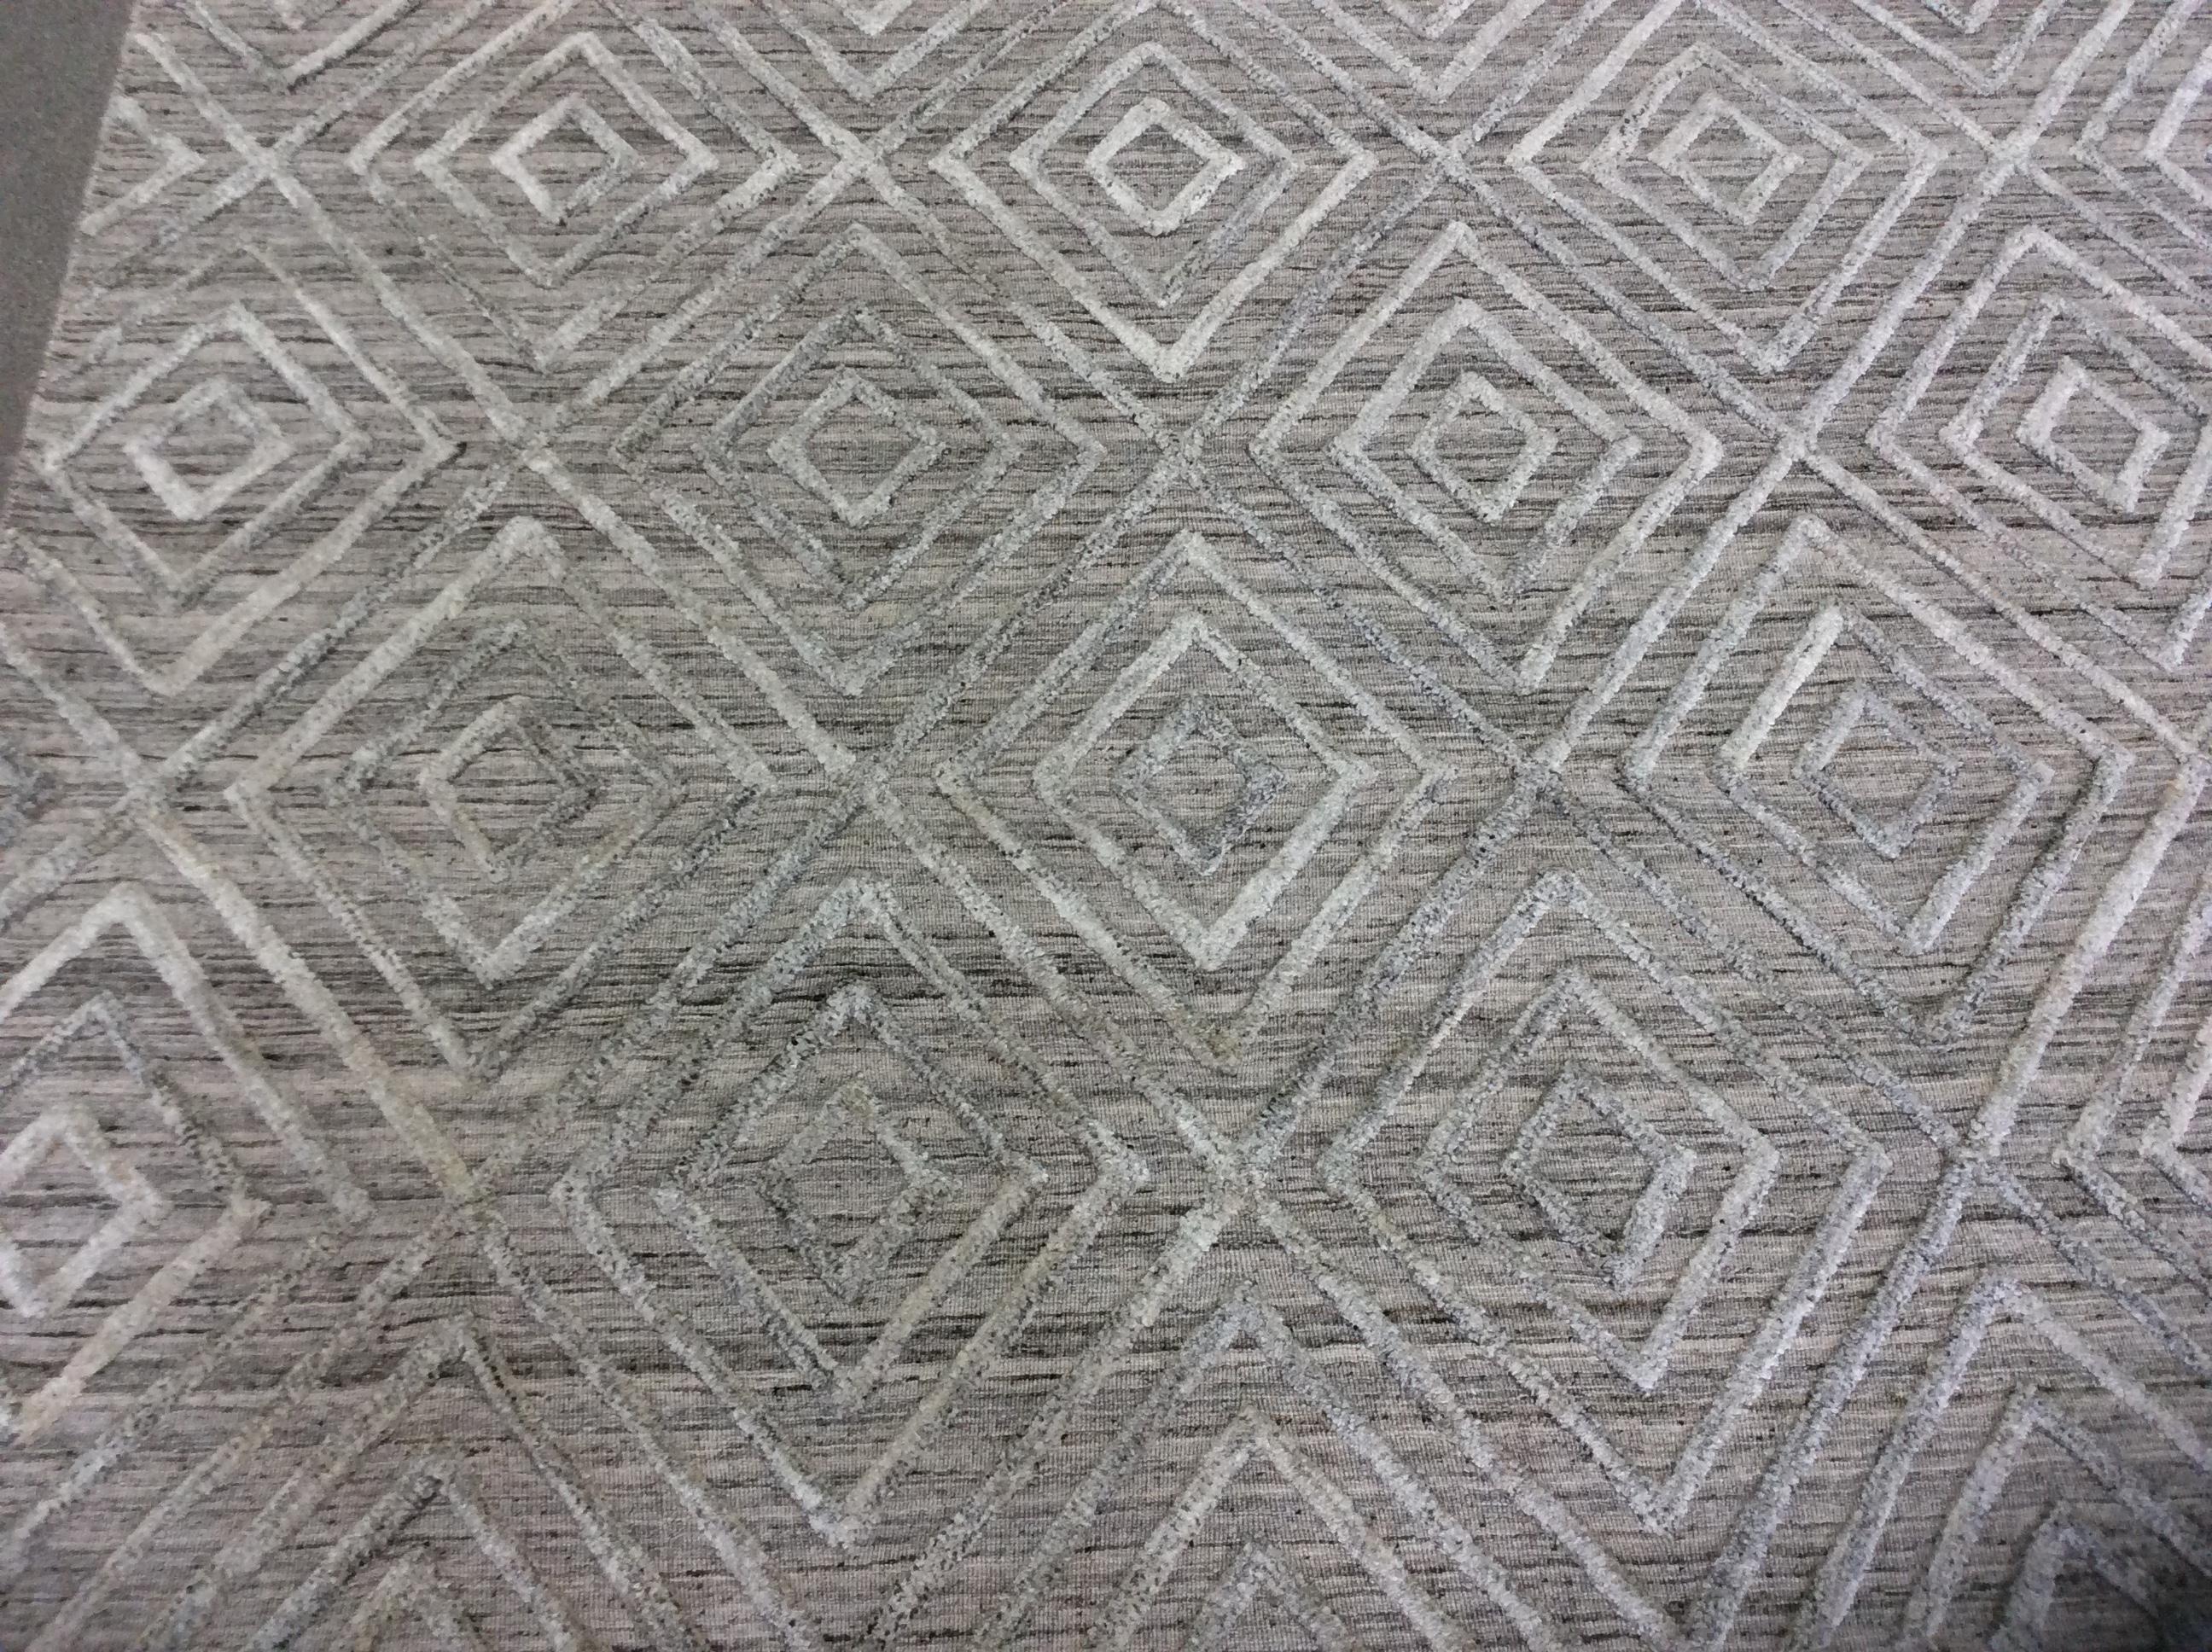 Geometric high low contemporary rug in taupe.

High low design giving a casual yet polished look. With neutral color and raised geometry pattern.